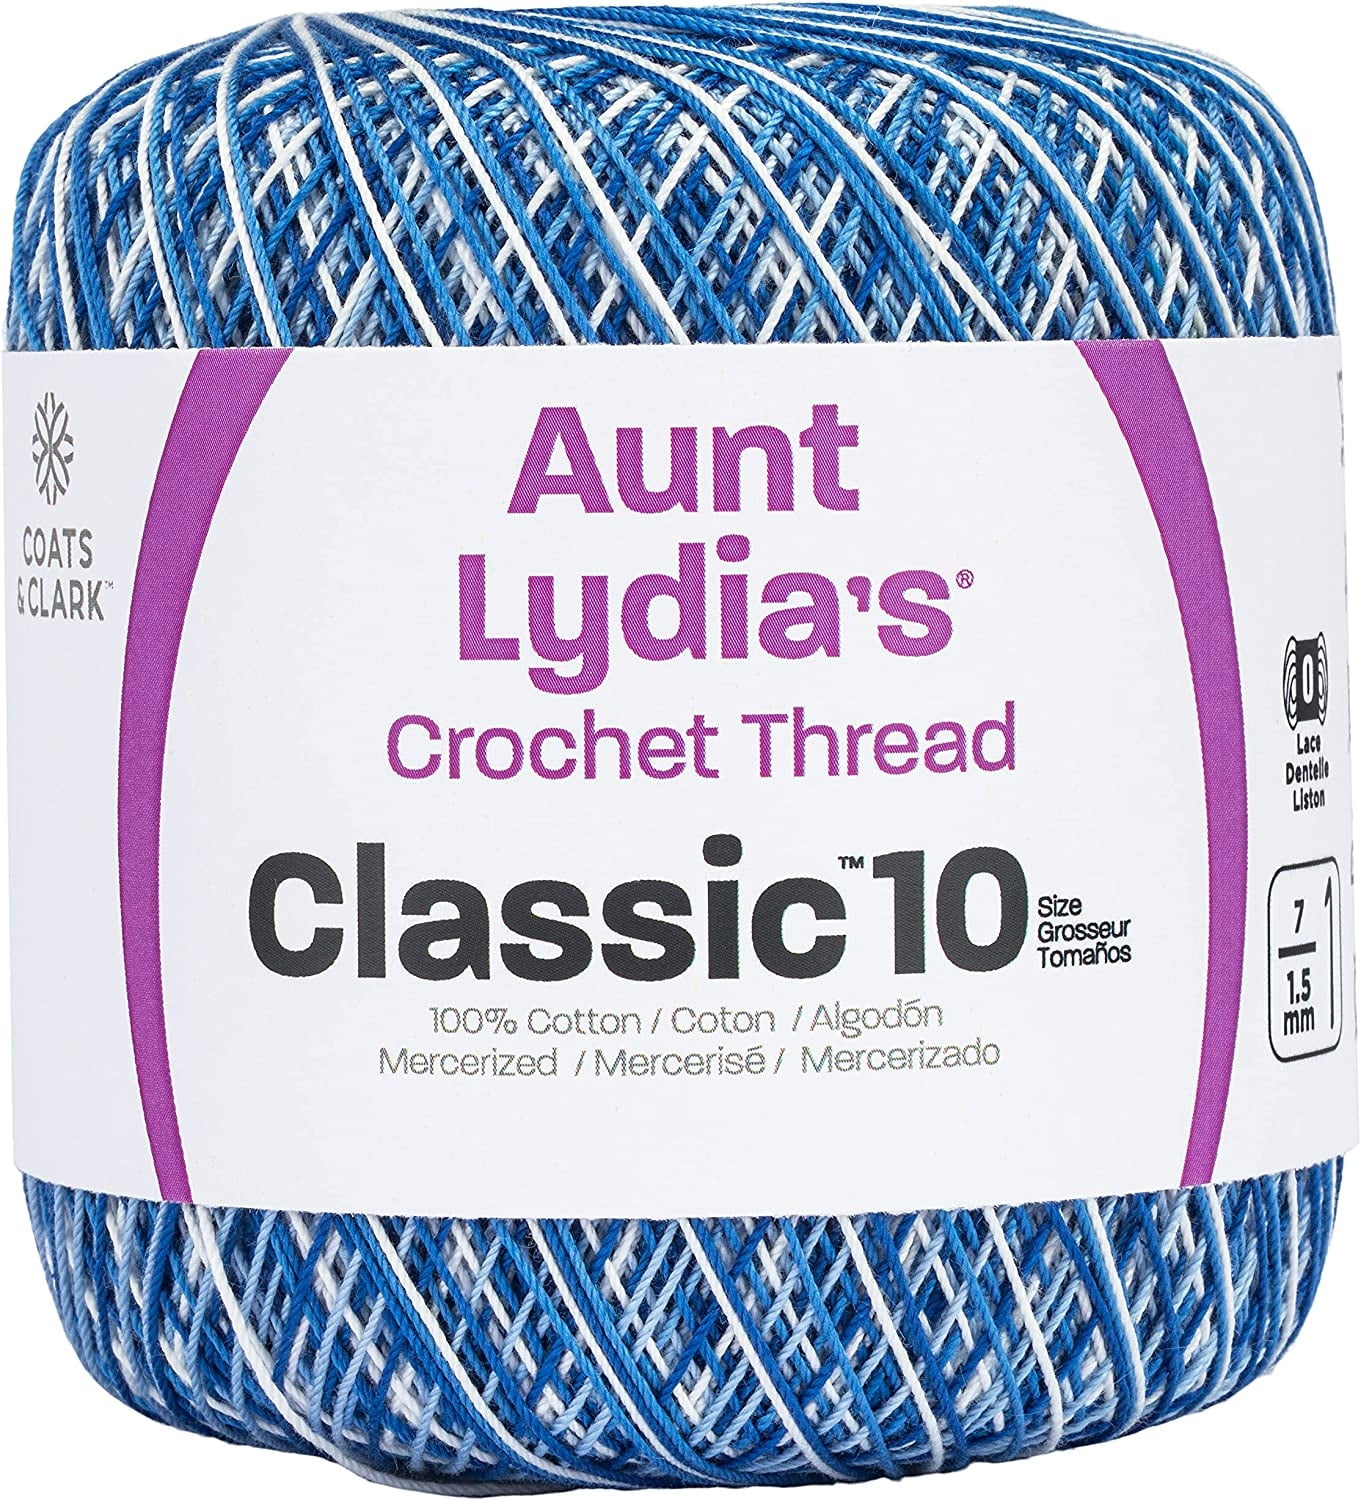 Aunt Lydia's Classic Cotton Crochet Thread, Size 10 - Hot Pink - Crafts  Direct